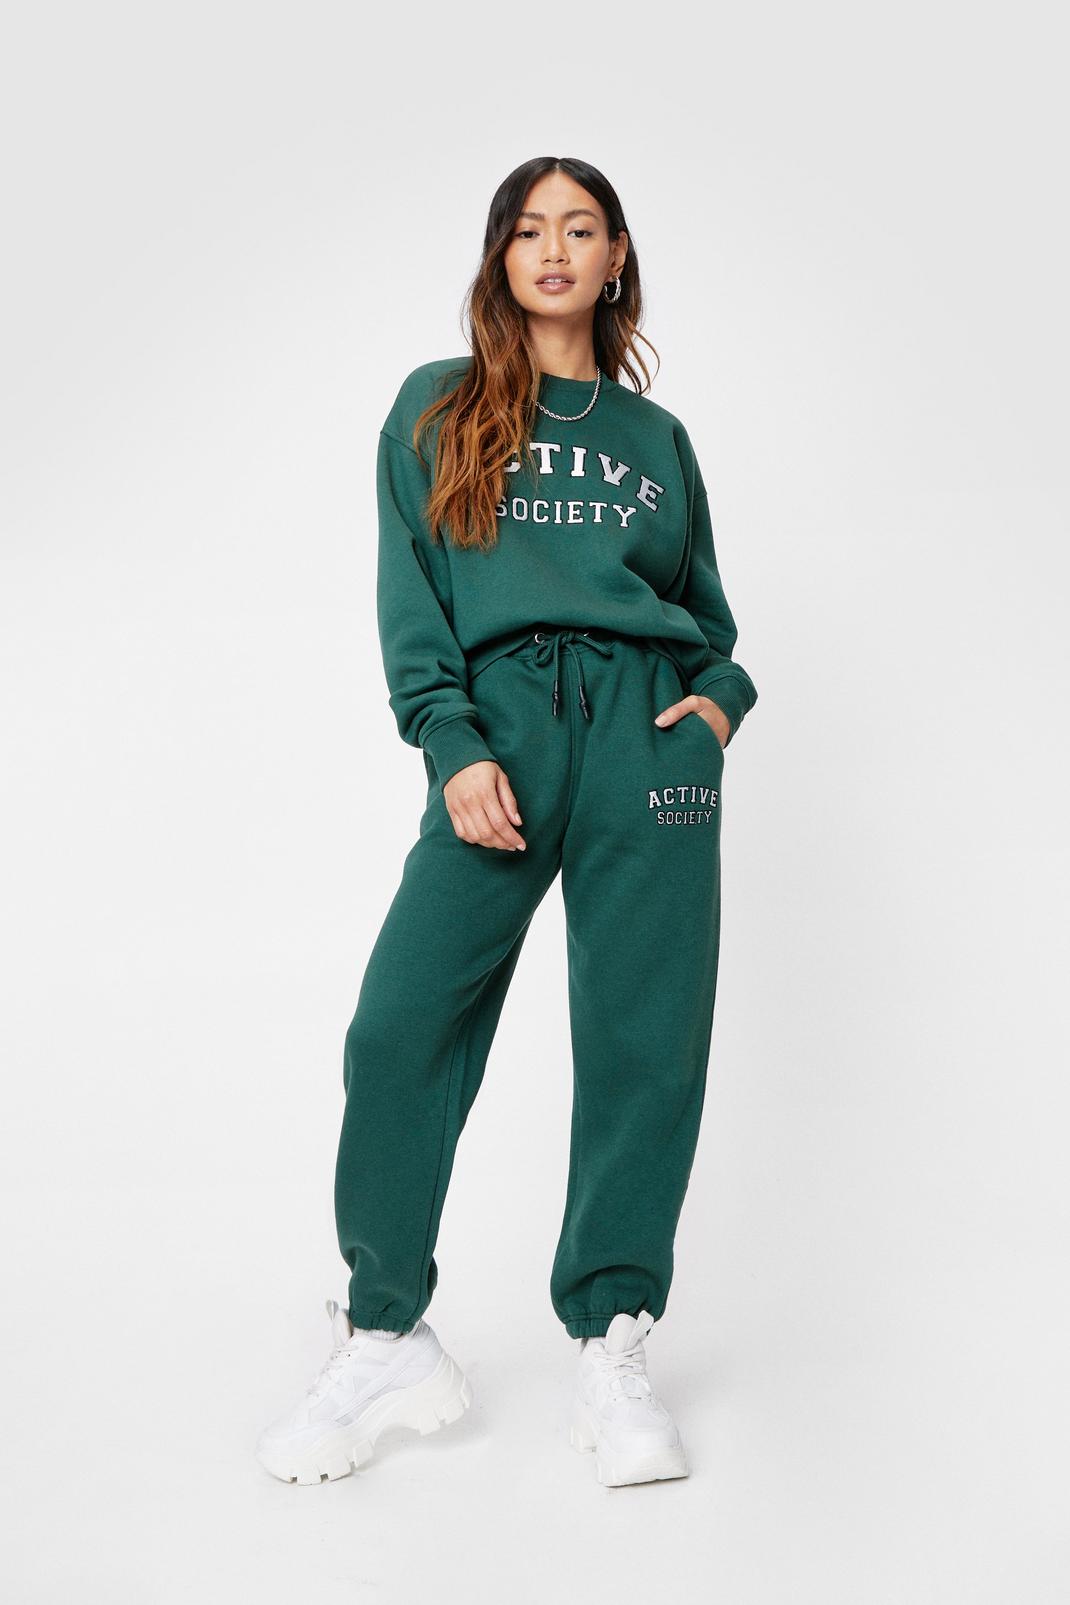 Green Petite Active Society High Waisted Sweatpants image number 1